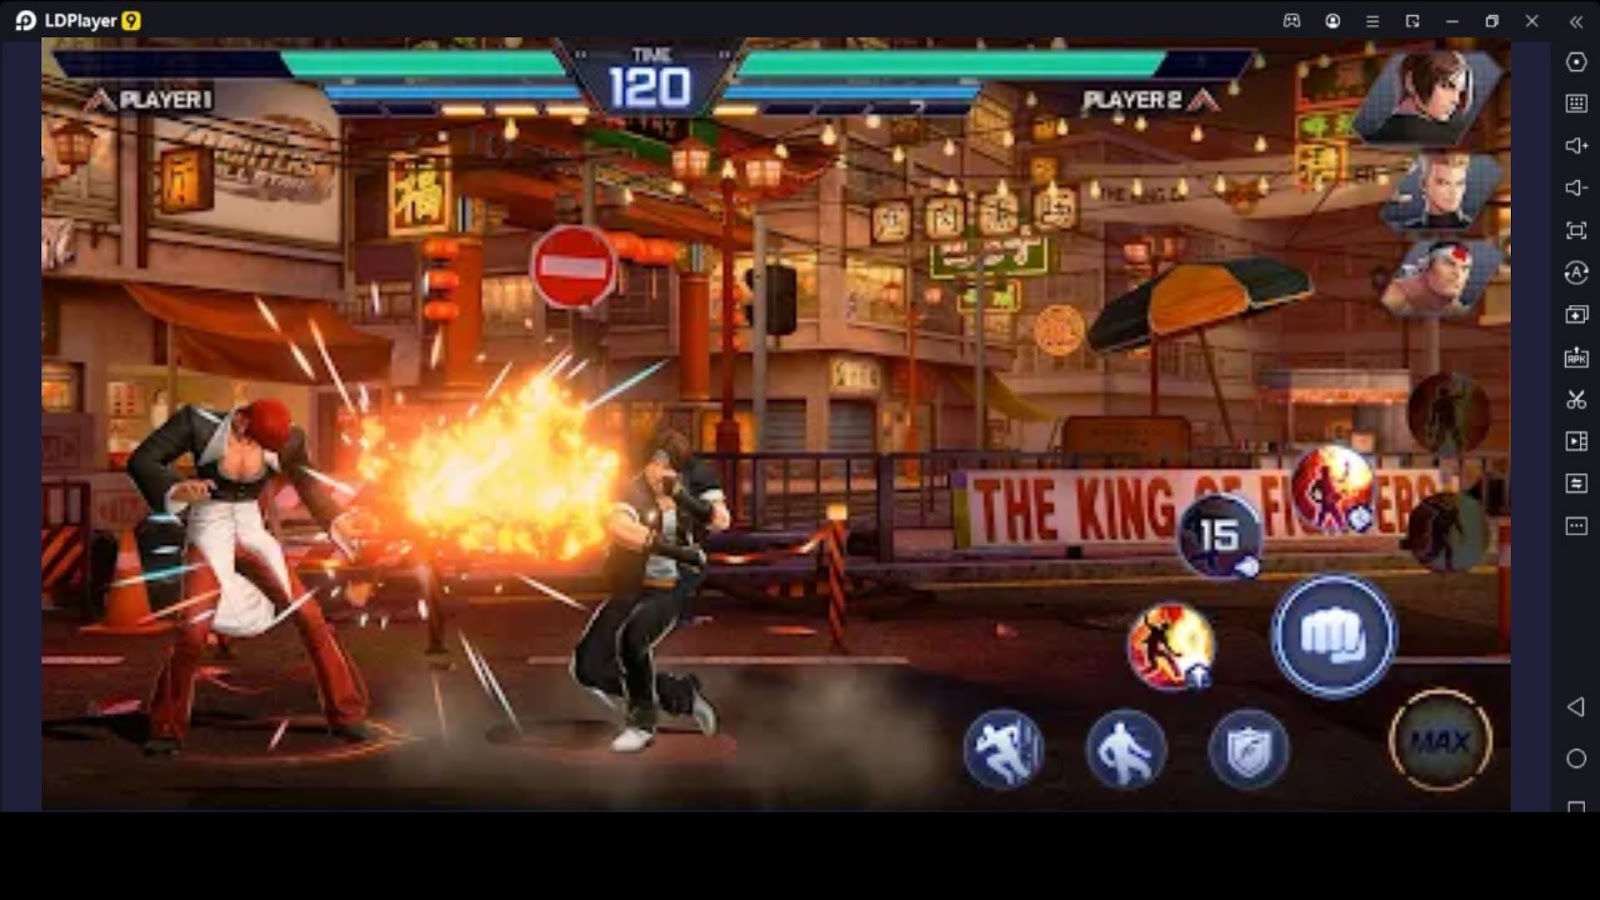 King of Fighters Arena How to Earn Money – The Basic Procedure